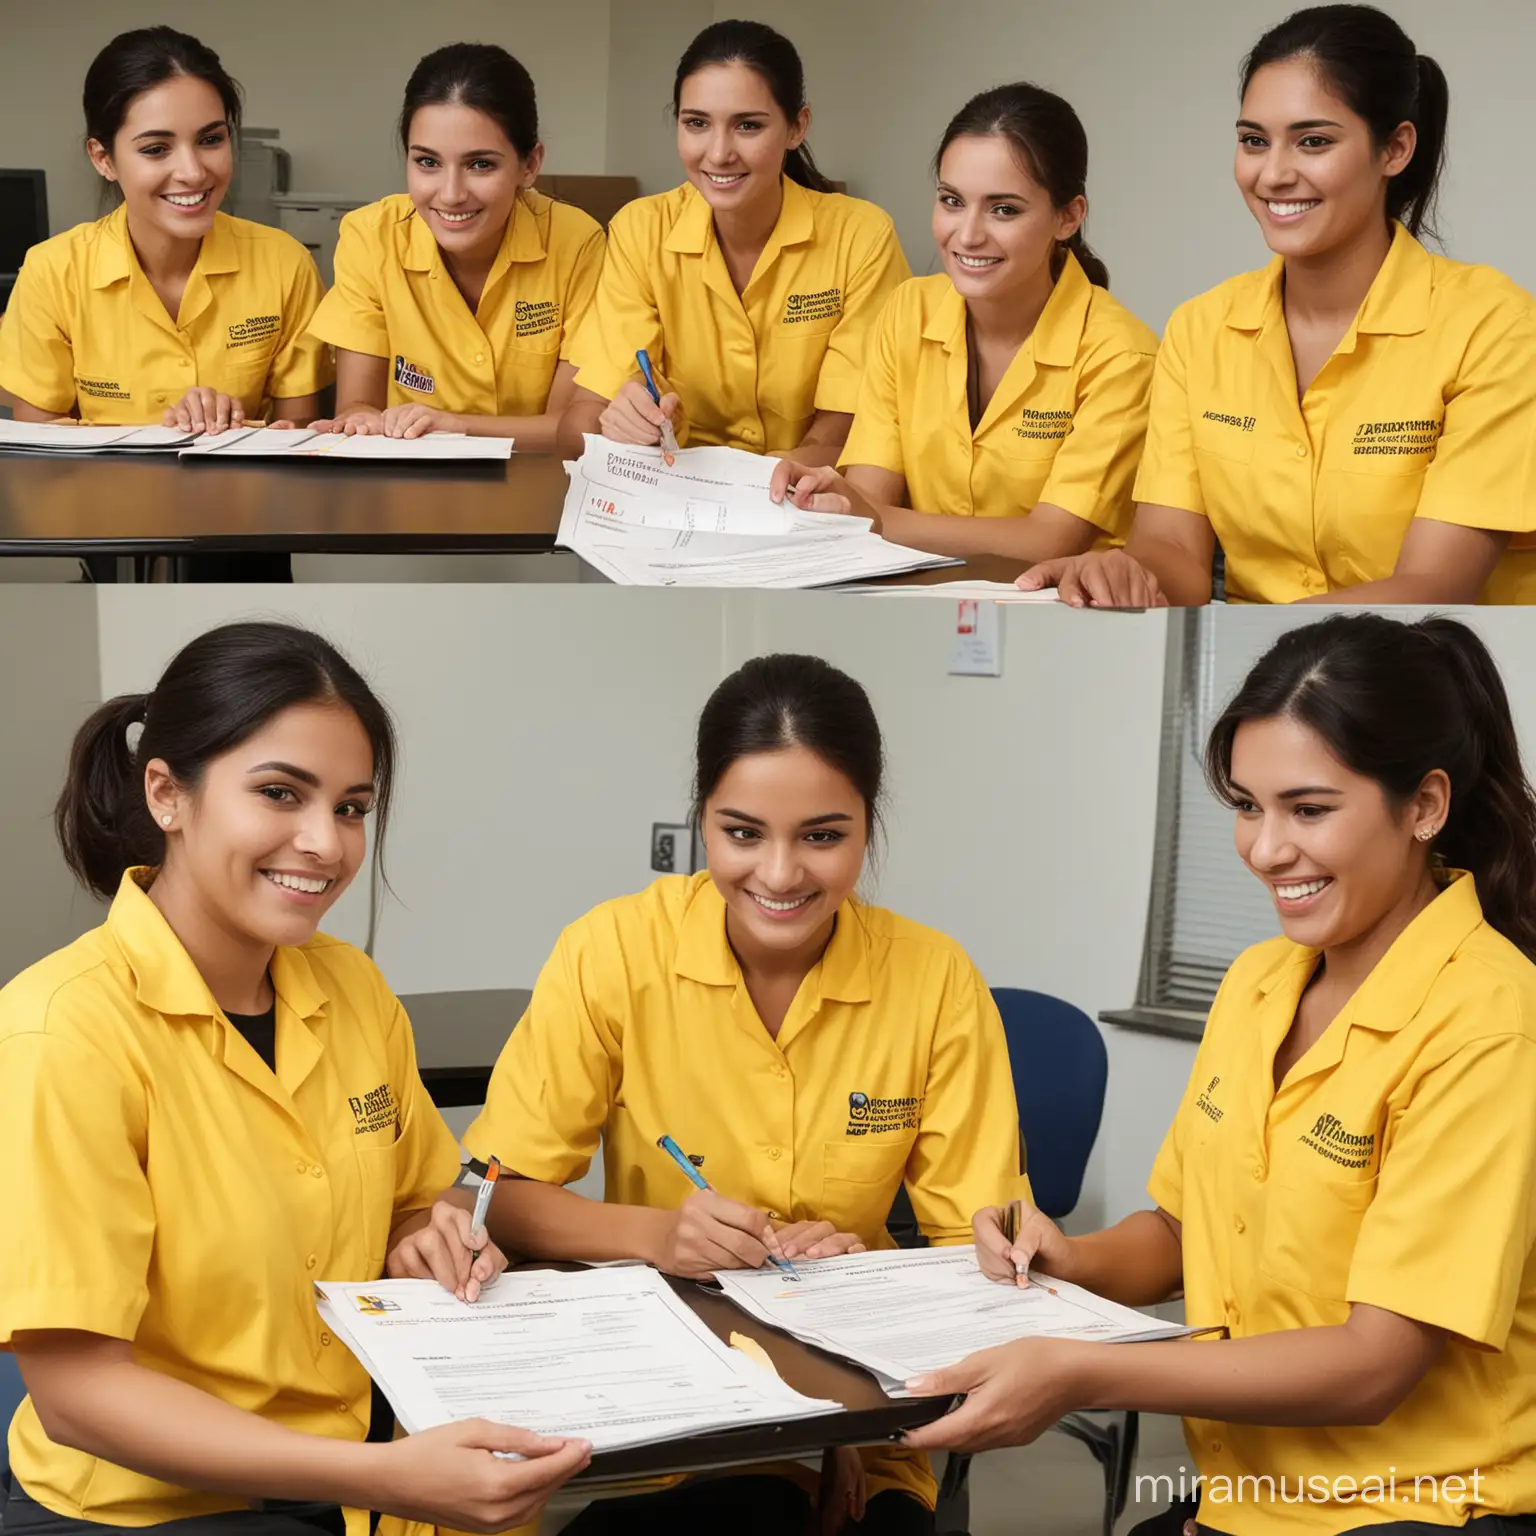 Generate vibrant training images for S&S Global Technical Training Institute, featuring a diverse range of training programs including housekeeping, old age care, maternity care, baby care, security guard, and office cleaner. Utilize a color theme dominated by #FCDE1B (bright yellow) for visual representation. Depict multiple individuals receiving training in different skills, ensuring corrected facial structures and a mix of both male and female participants with happy faces. Showcase the dynamic interaction between trainers and trainees, emphasizing hands-on learning experiences. Capture the excitement of unemployed individuals getting employed through training programs. Highlight the issuance of training certificates and immediate job opportunities for both domestic and international employment, inspiring confidence and growth.